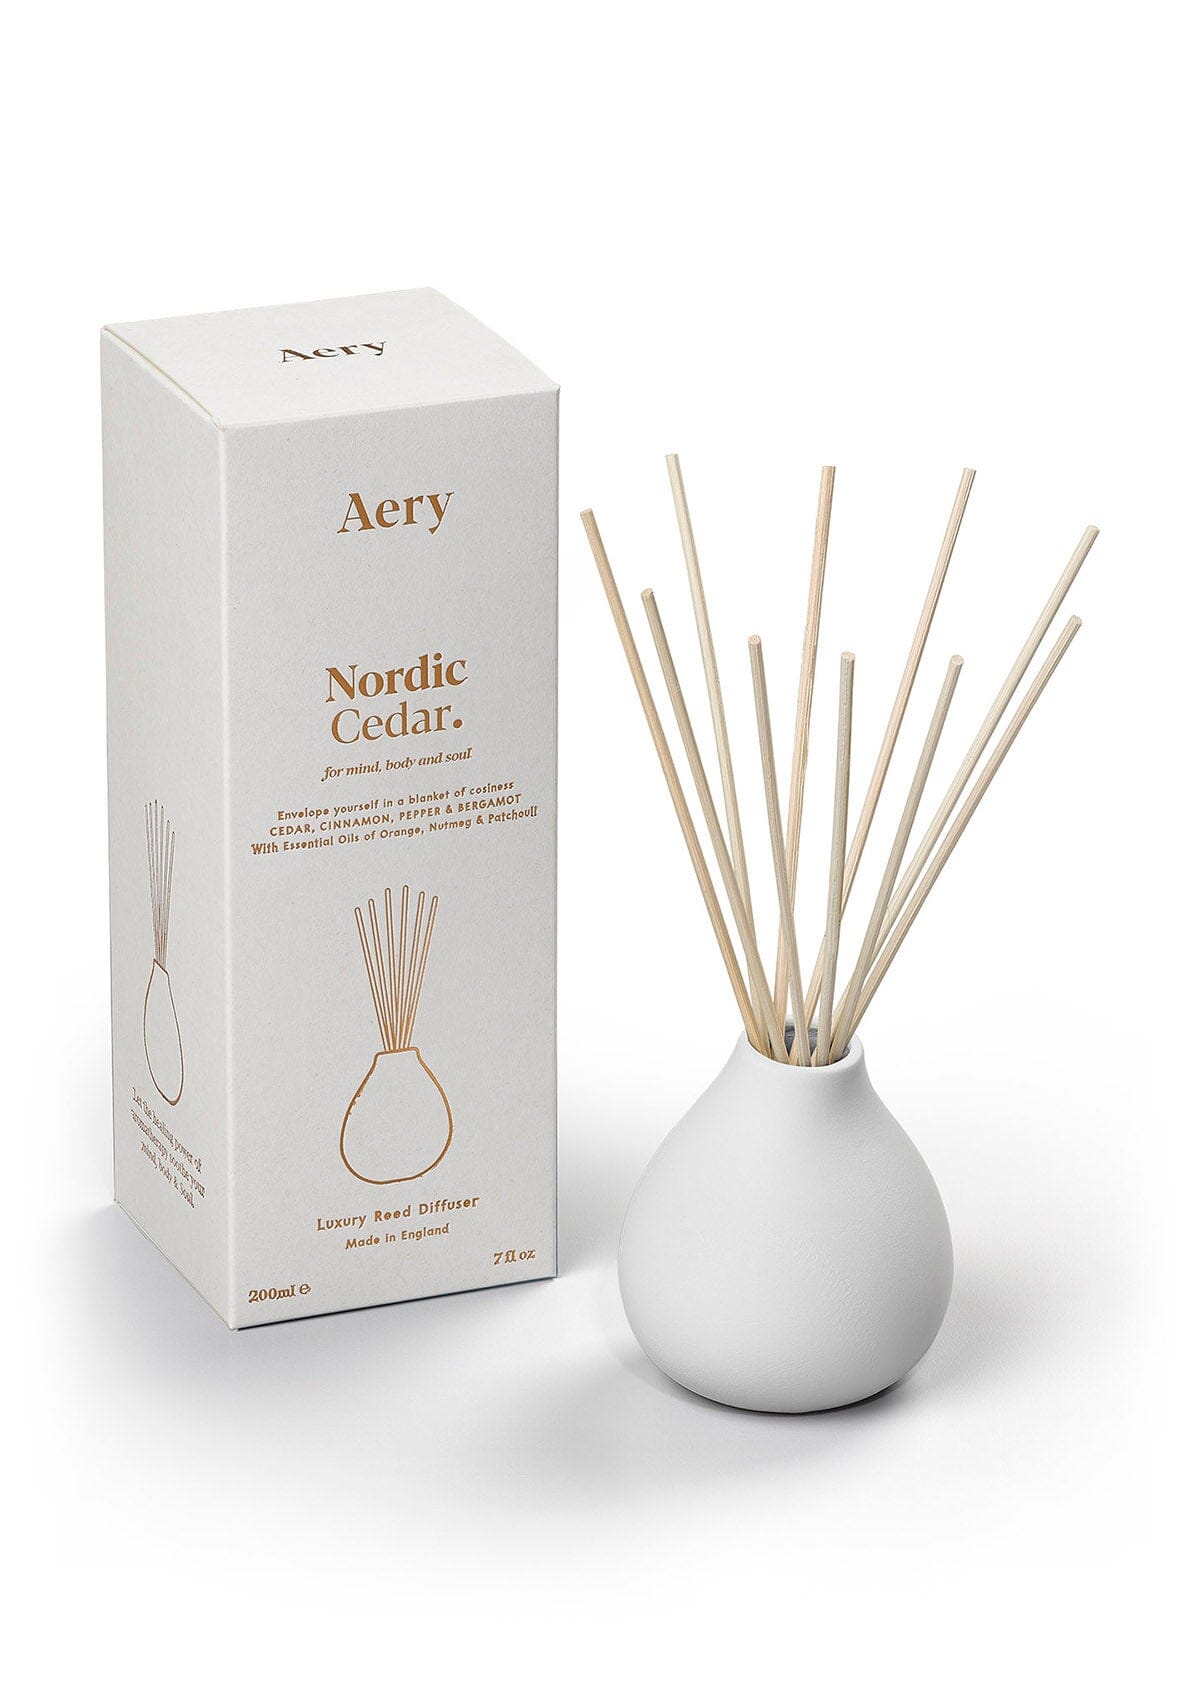 white Nordic Cedar diffuser with product packaging by Aery 